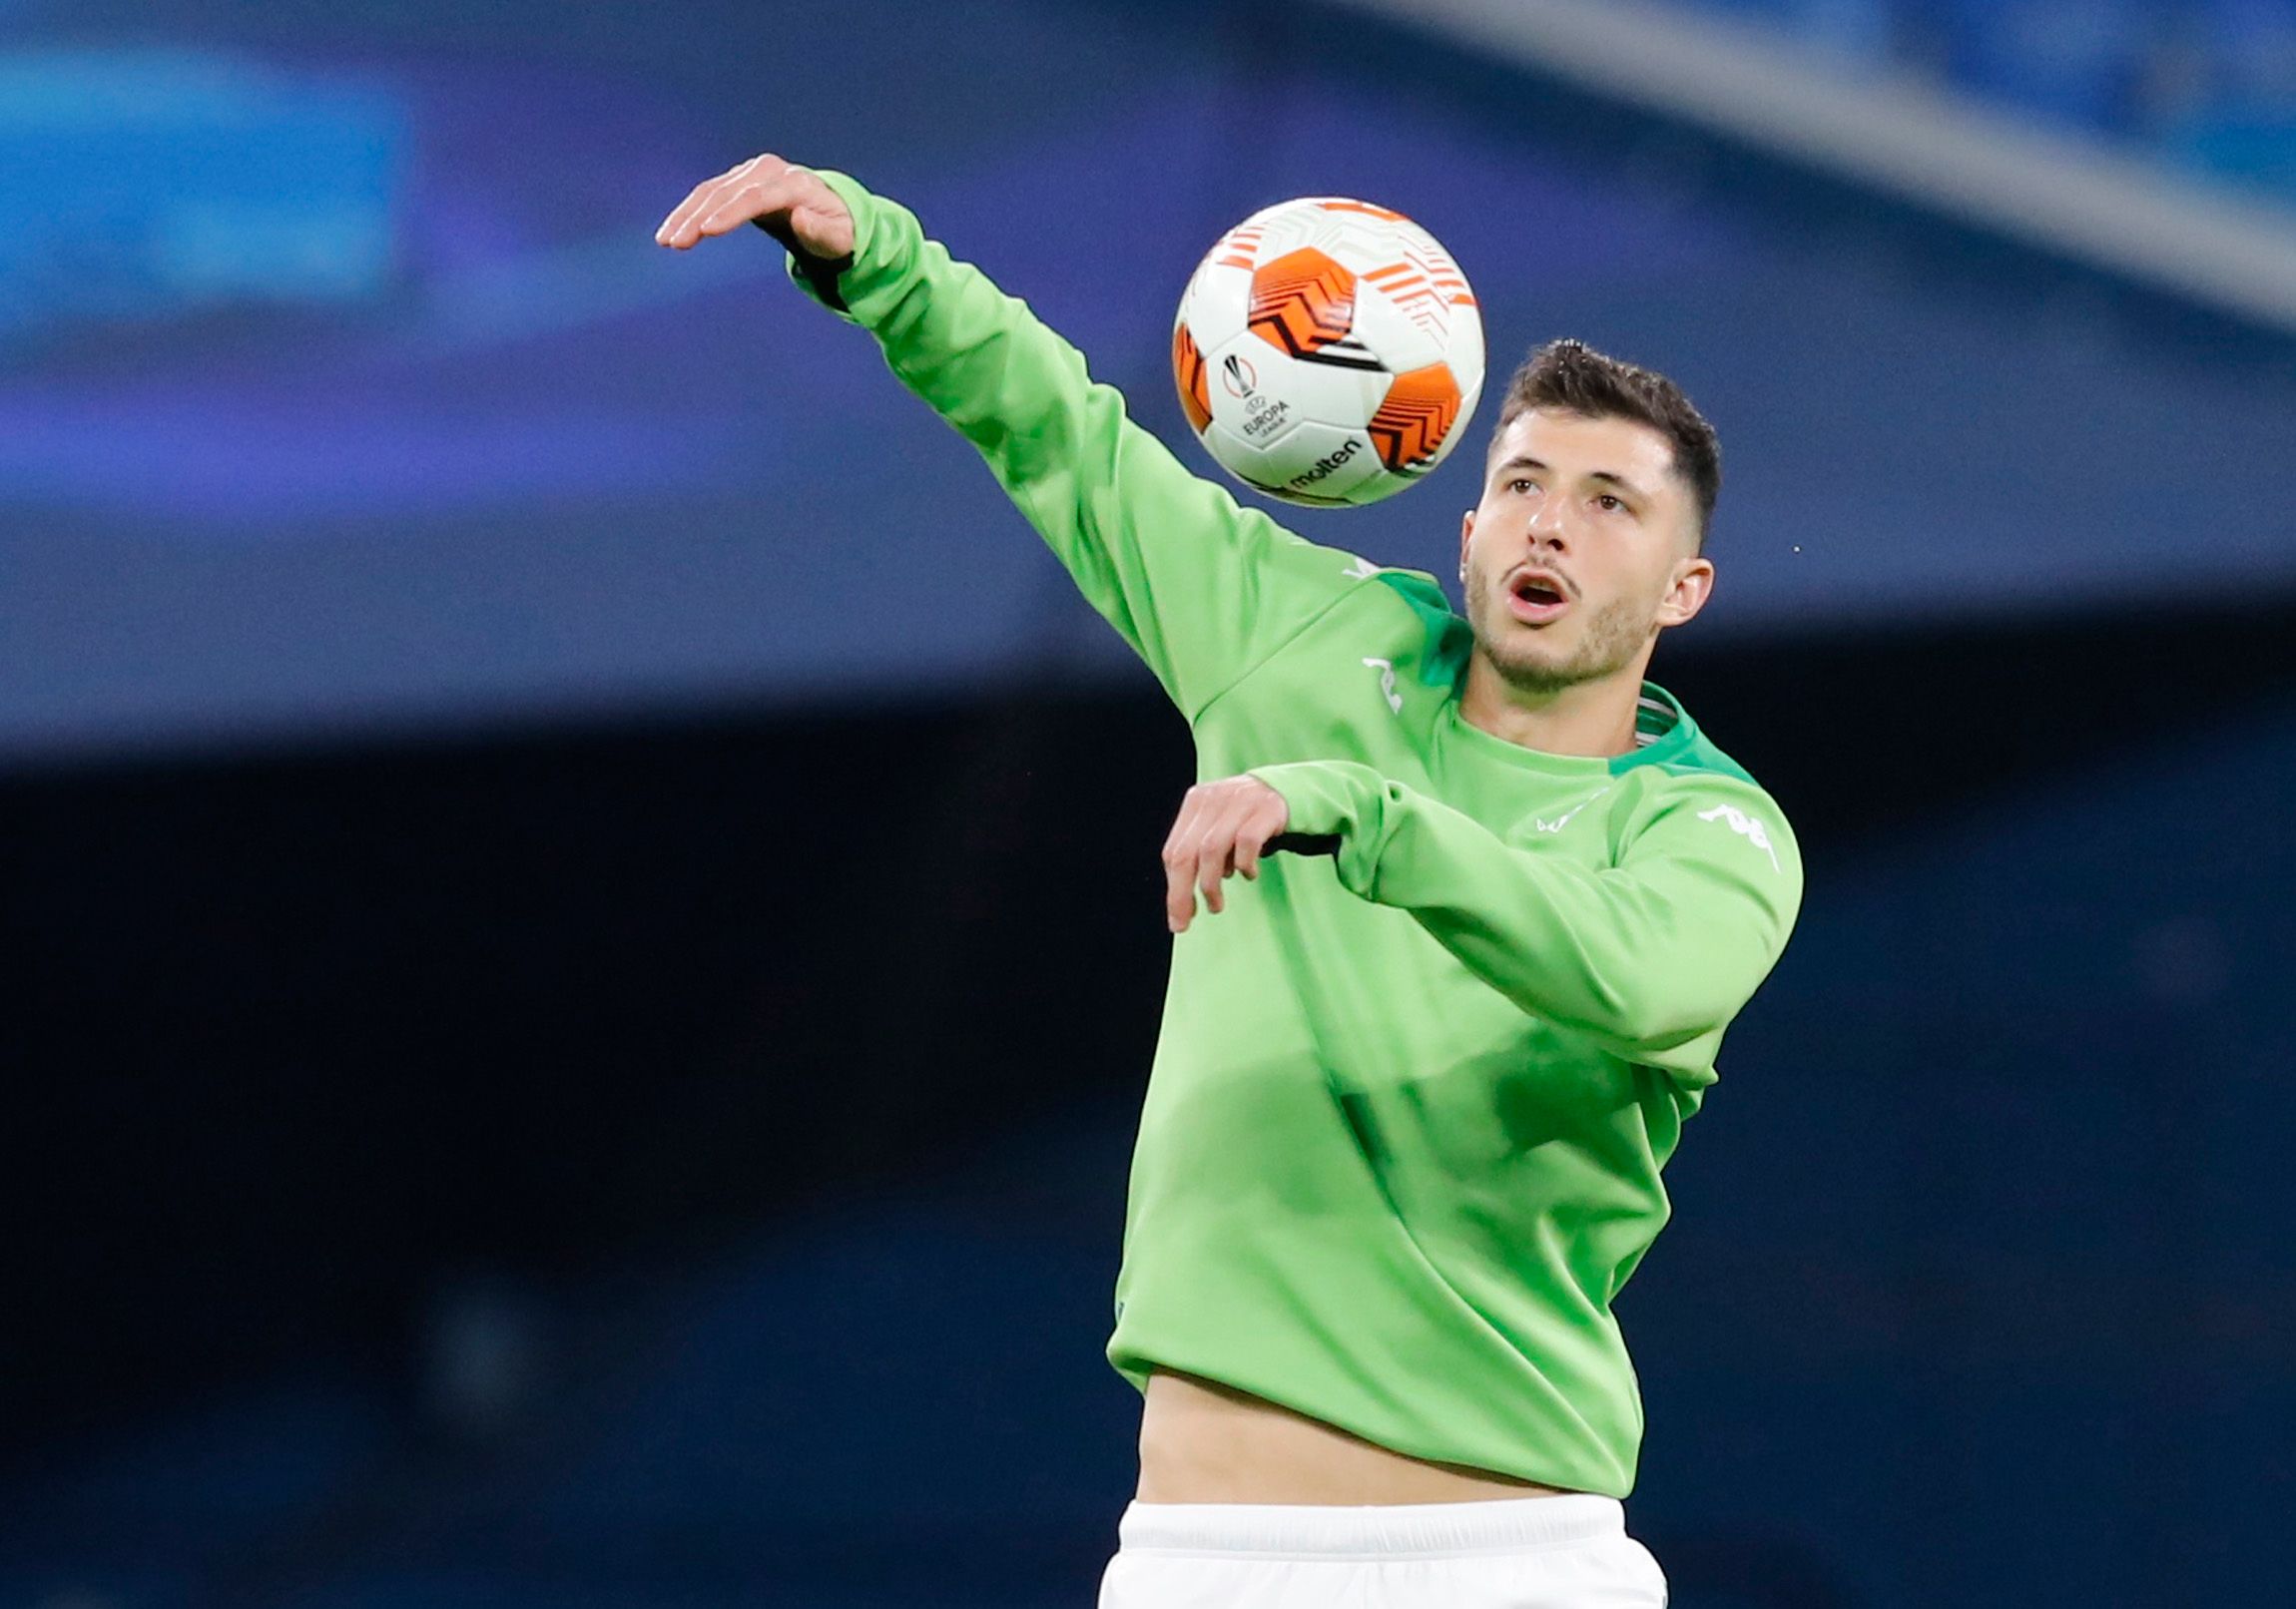 Soccer Football - Europa League - Play Off First Leg - Zenit St Petersburg v Real Betis - Gazprom Arena, Saint Petersburg, Russia - February 17, 2022 Real Betis' Guido Rodriguez during the warm up before the match REUTERS/Anton Vaganov